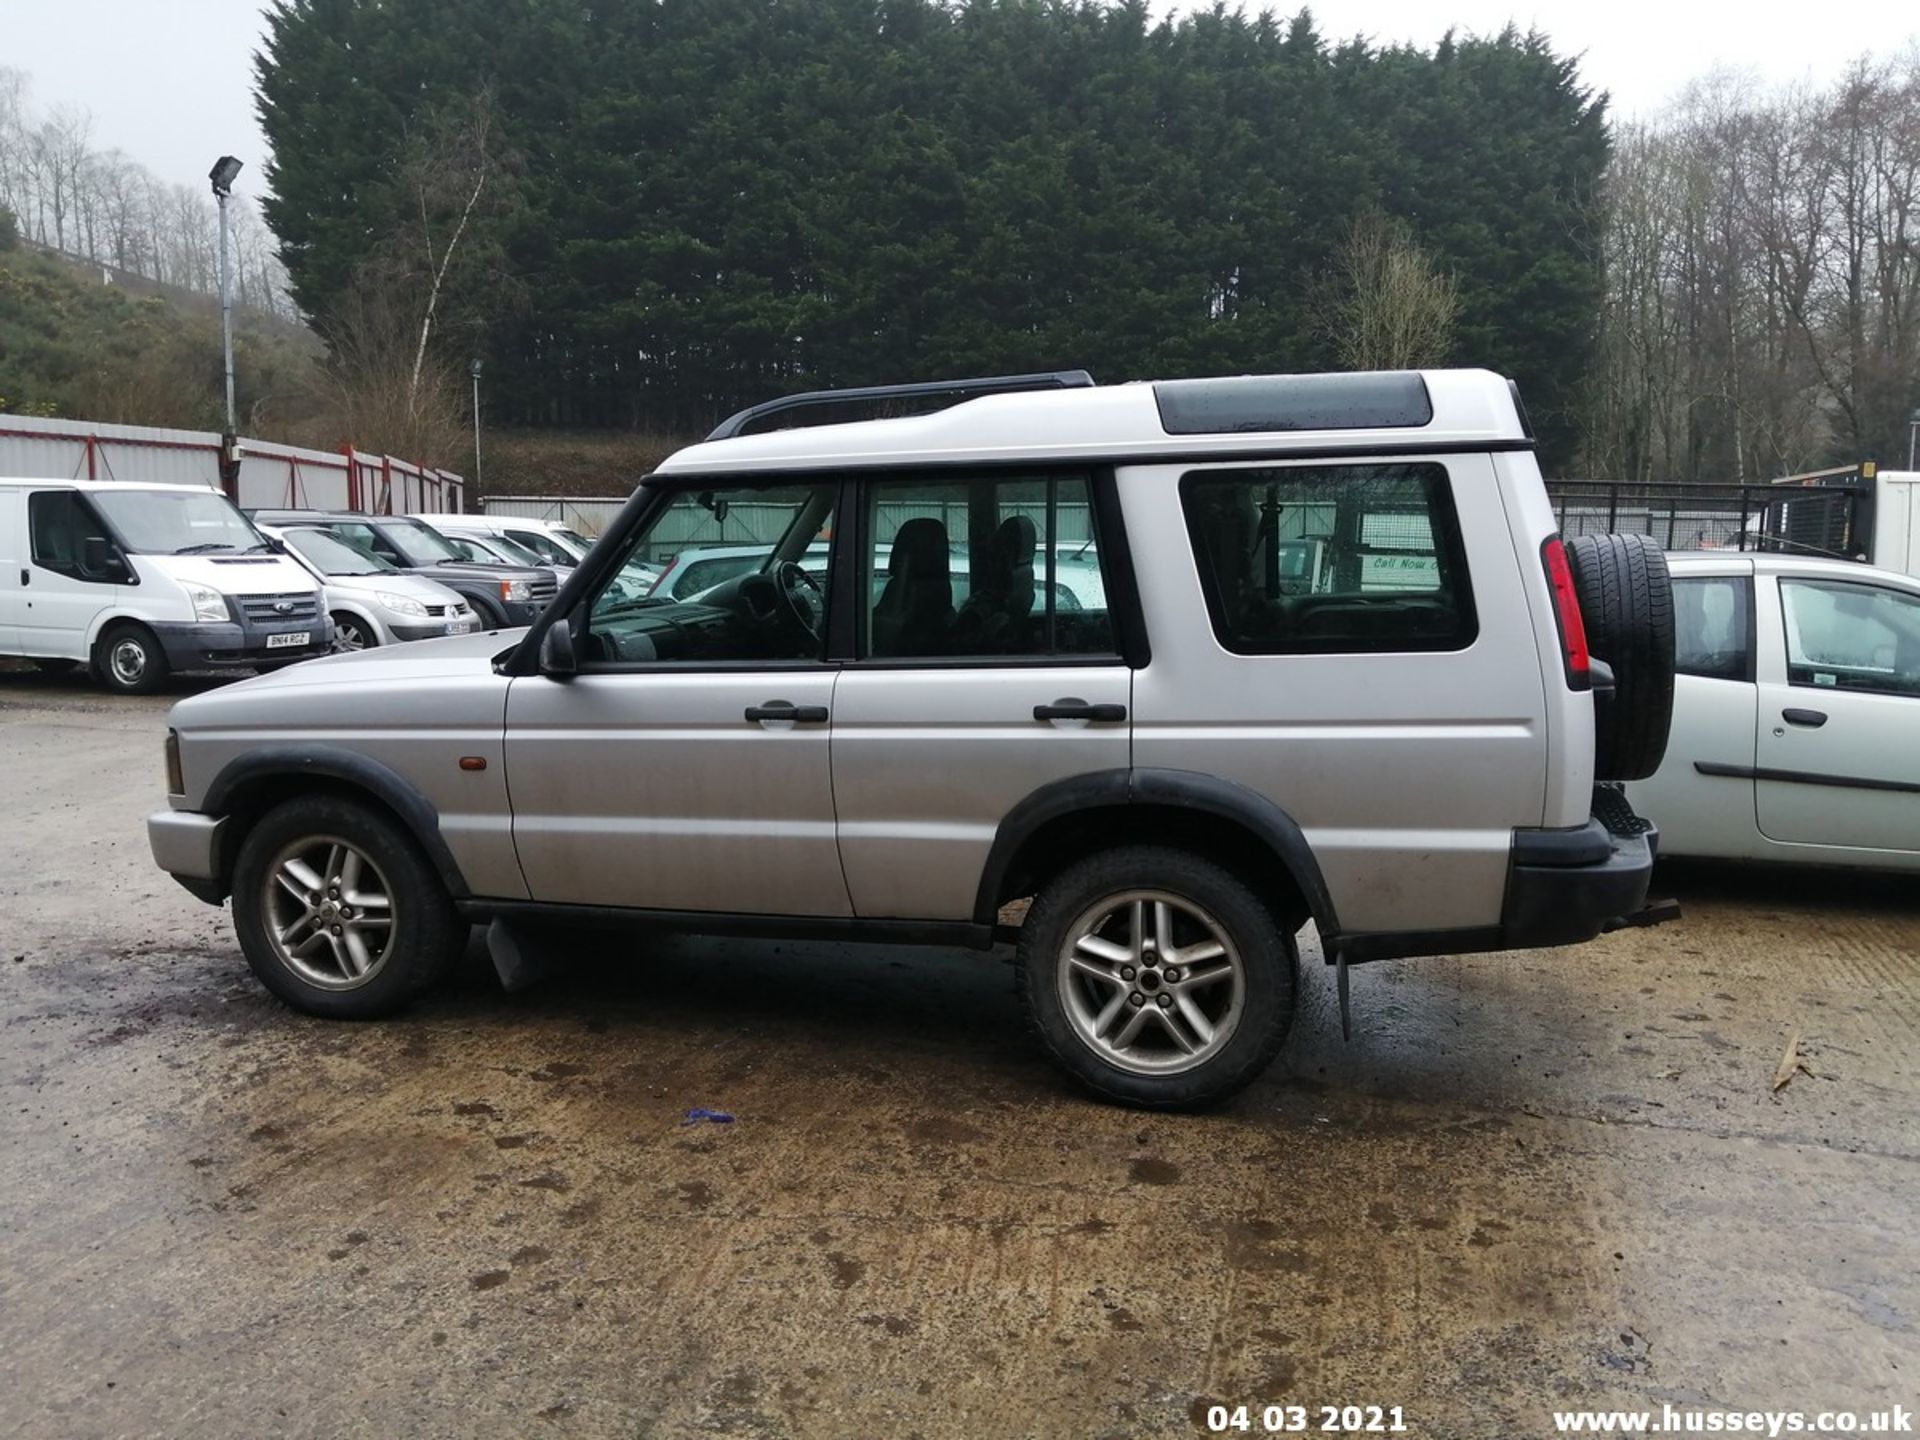 04/54 LAND ROVER DISCOVERY LANDMARK TD5 - 2495cc 5dr Estate (Silver) - Image 17 of 23